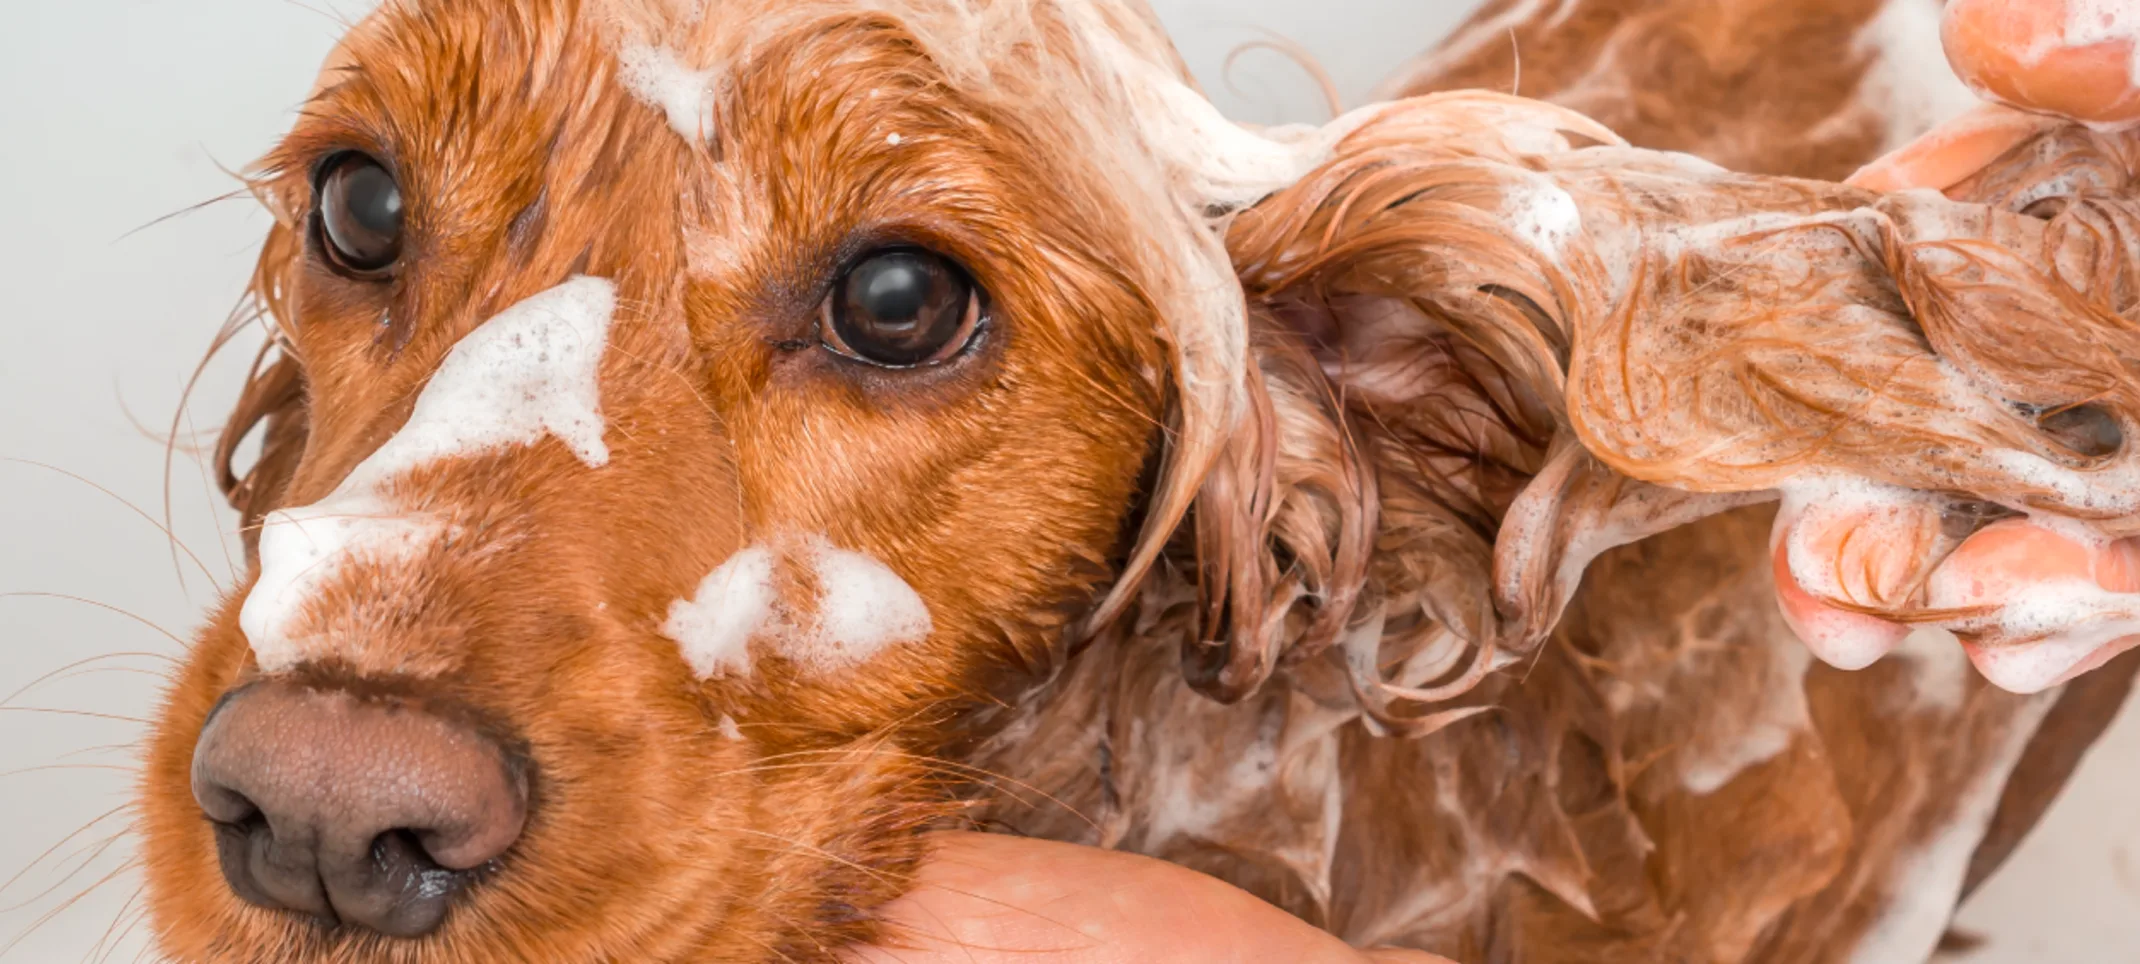 Dog in bath with soap all over him